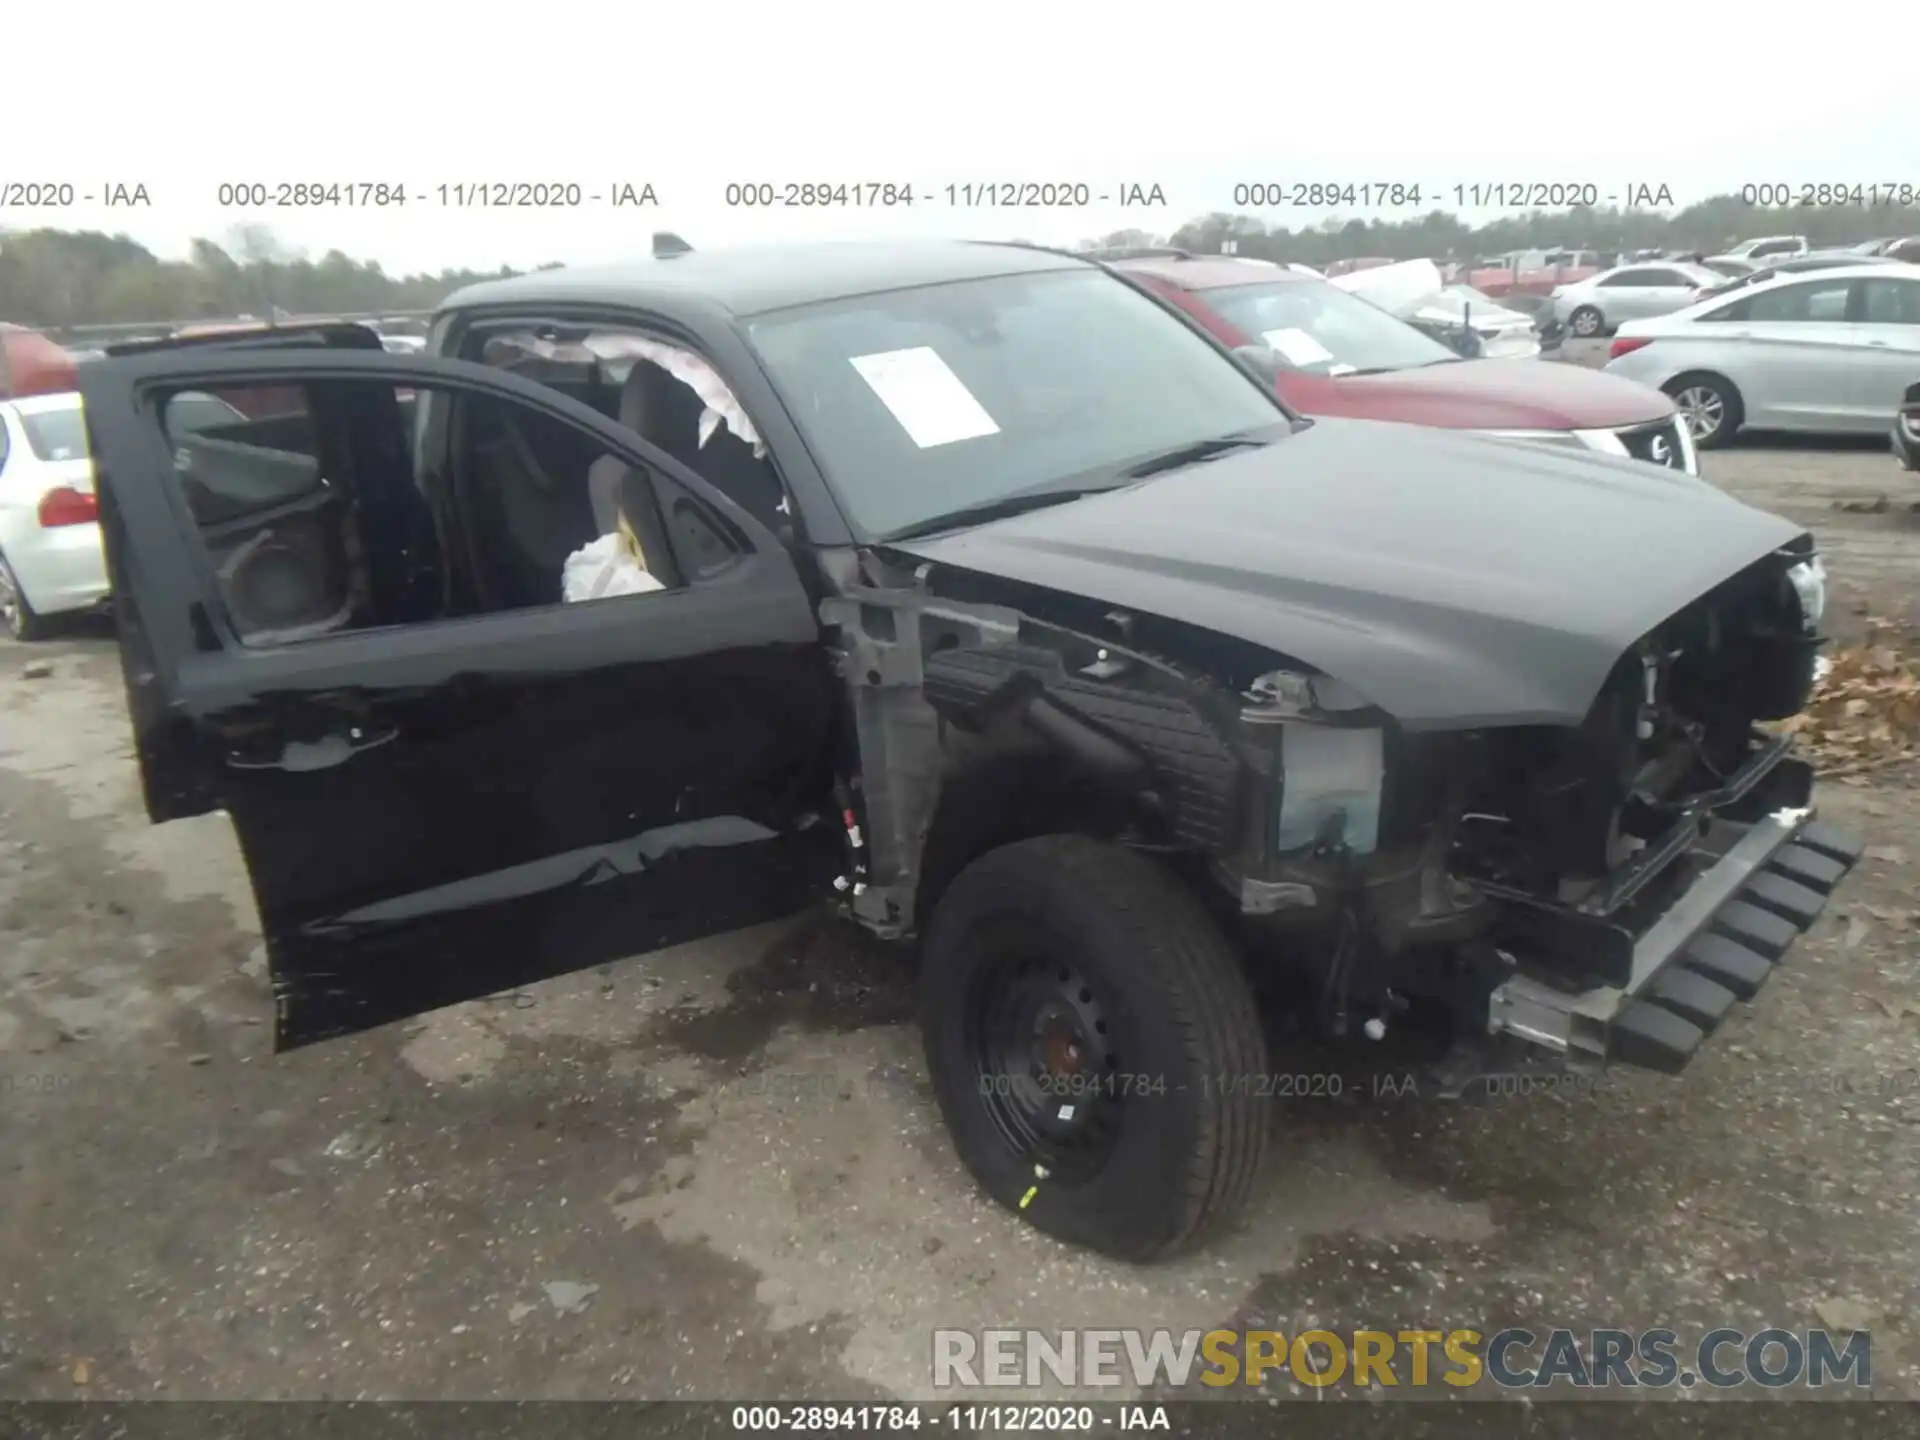 1 Photograph of a damaged car 3TYRX5GN9LT001459 TOYOTA TACOMA 2WD 2020